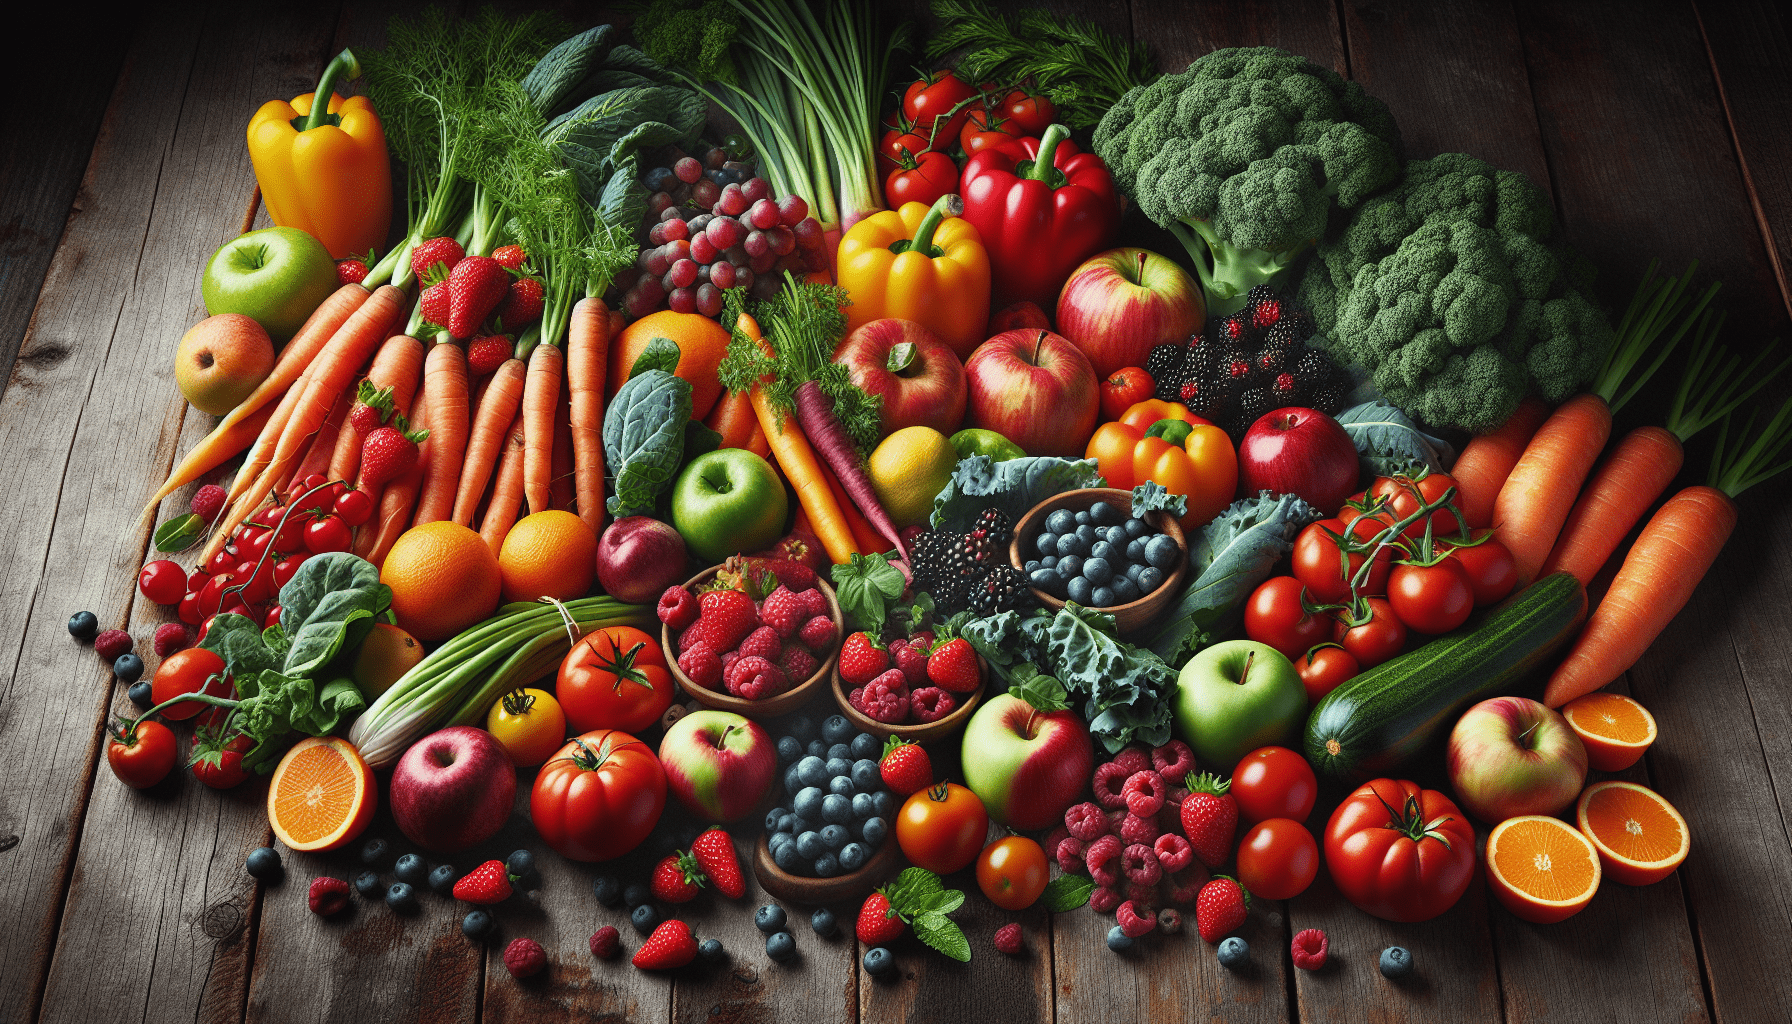 The Nutritional Benefits of Organic Foods